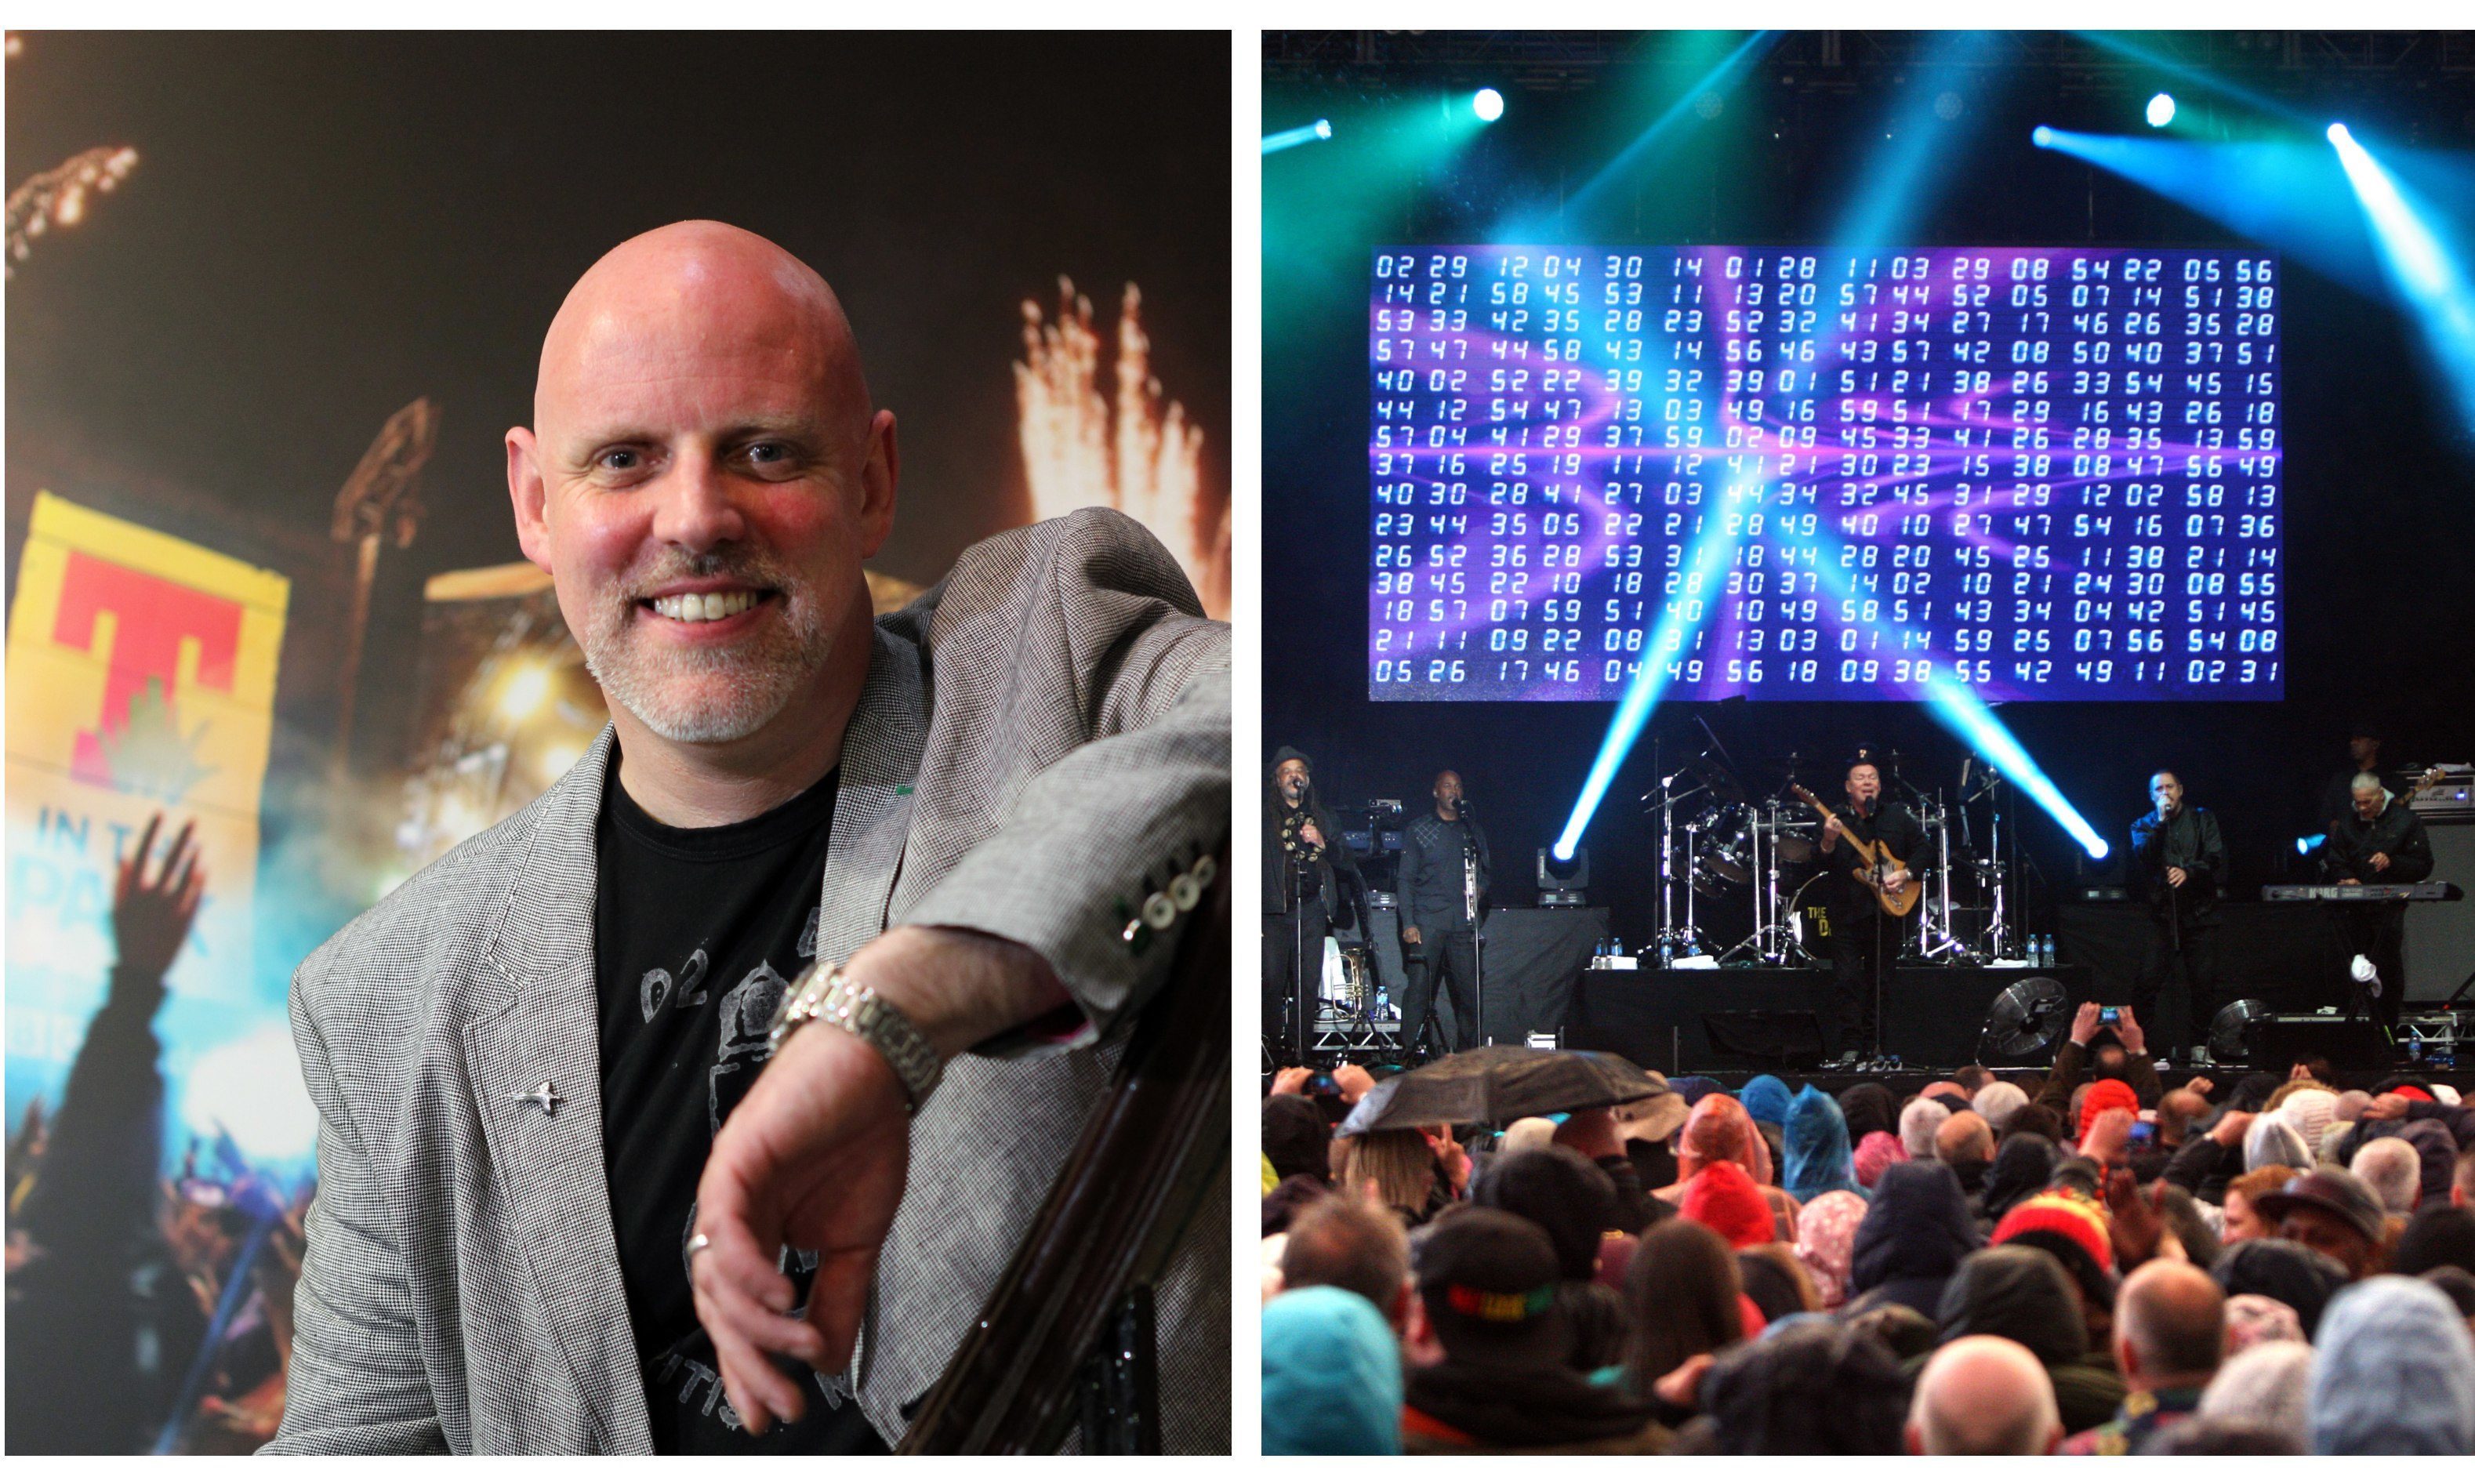 Geoff Ellis, left, and the first concert at Slessor Gardens, right.